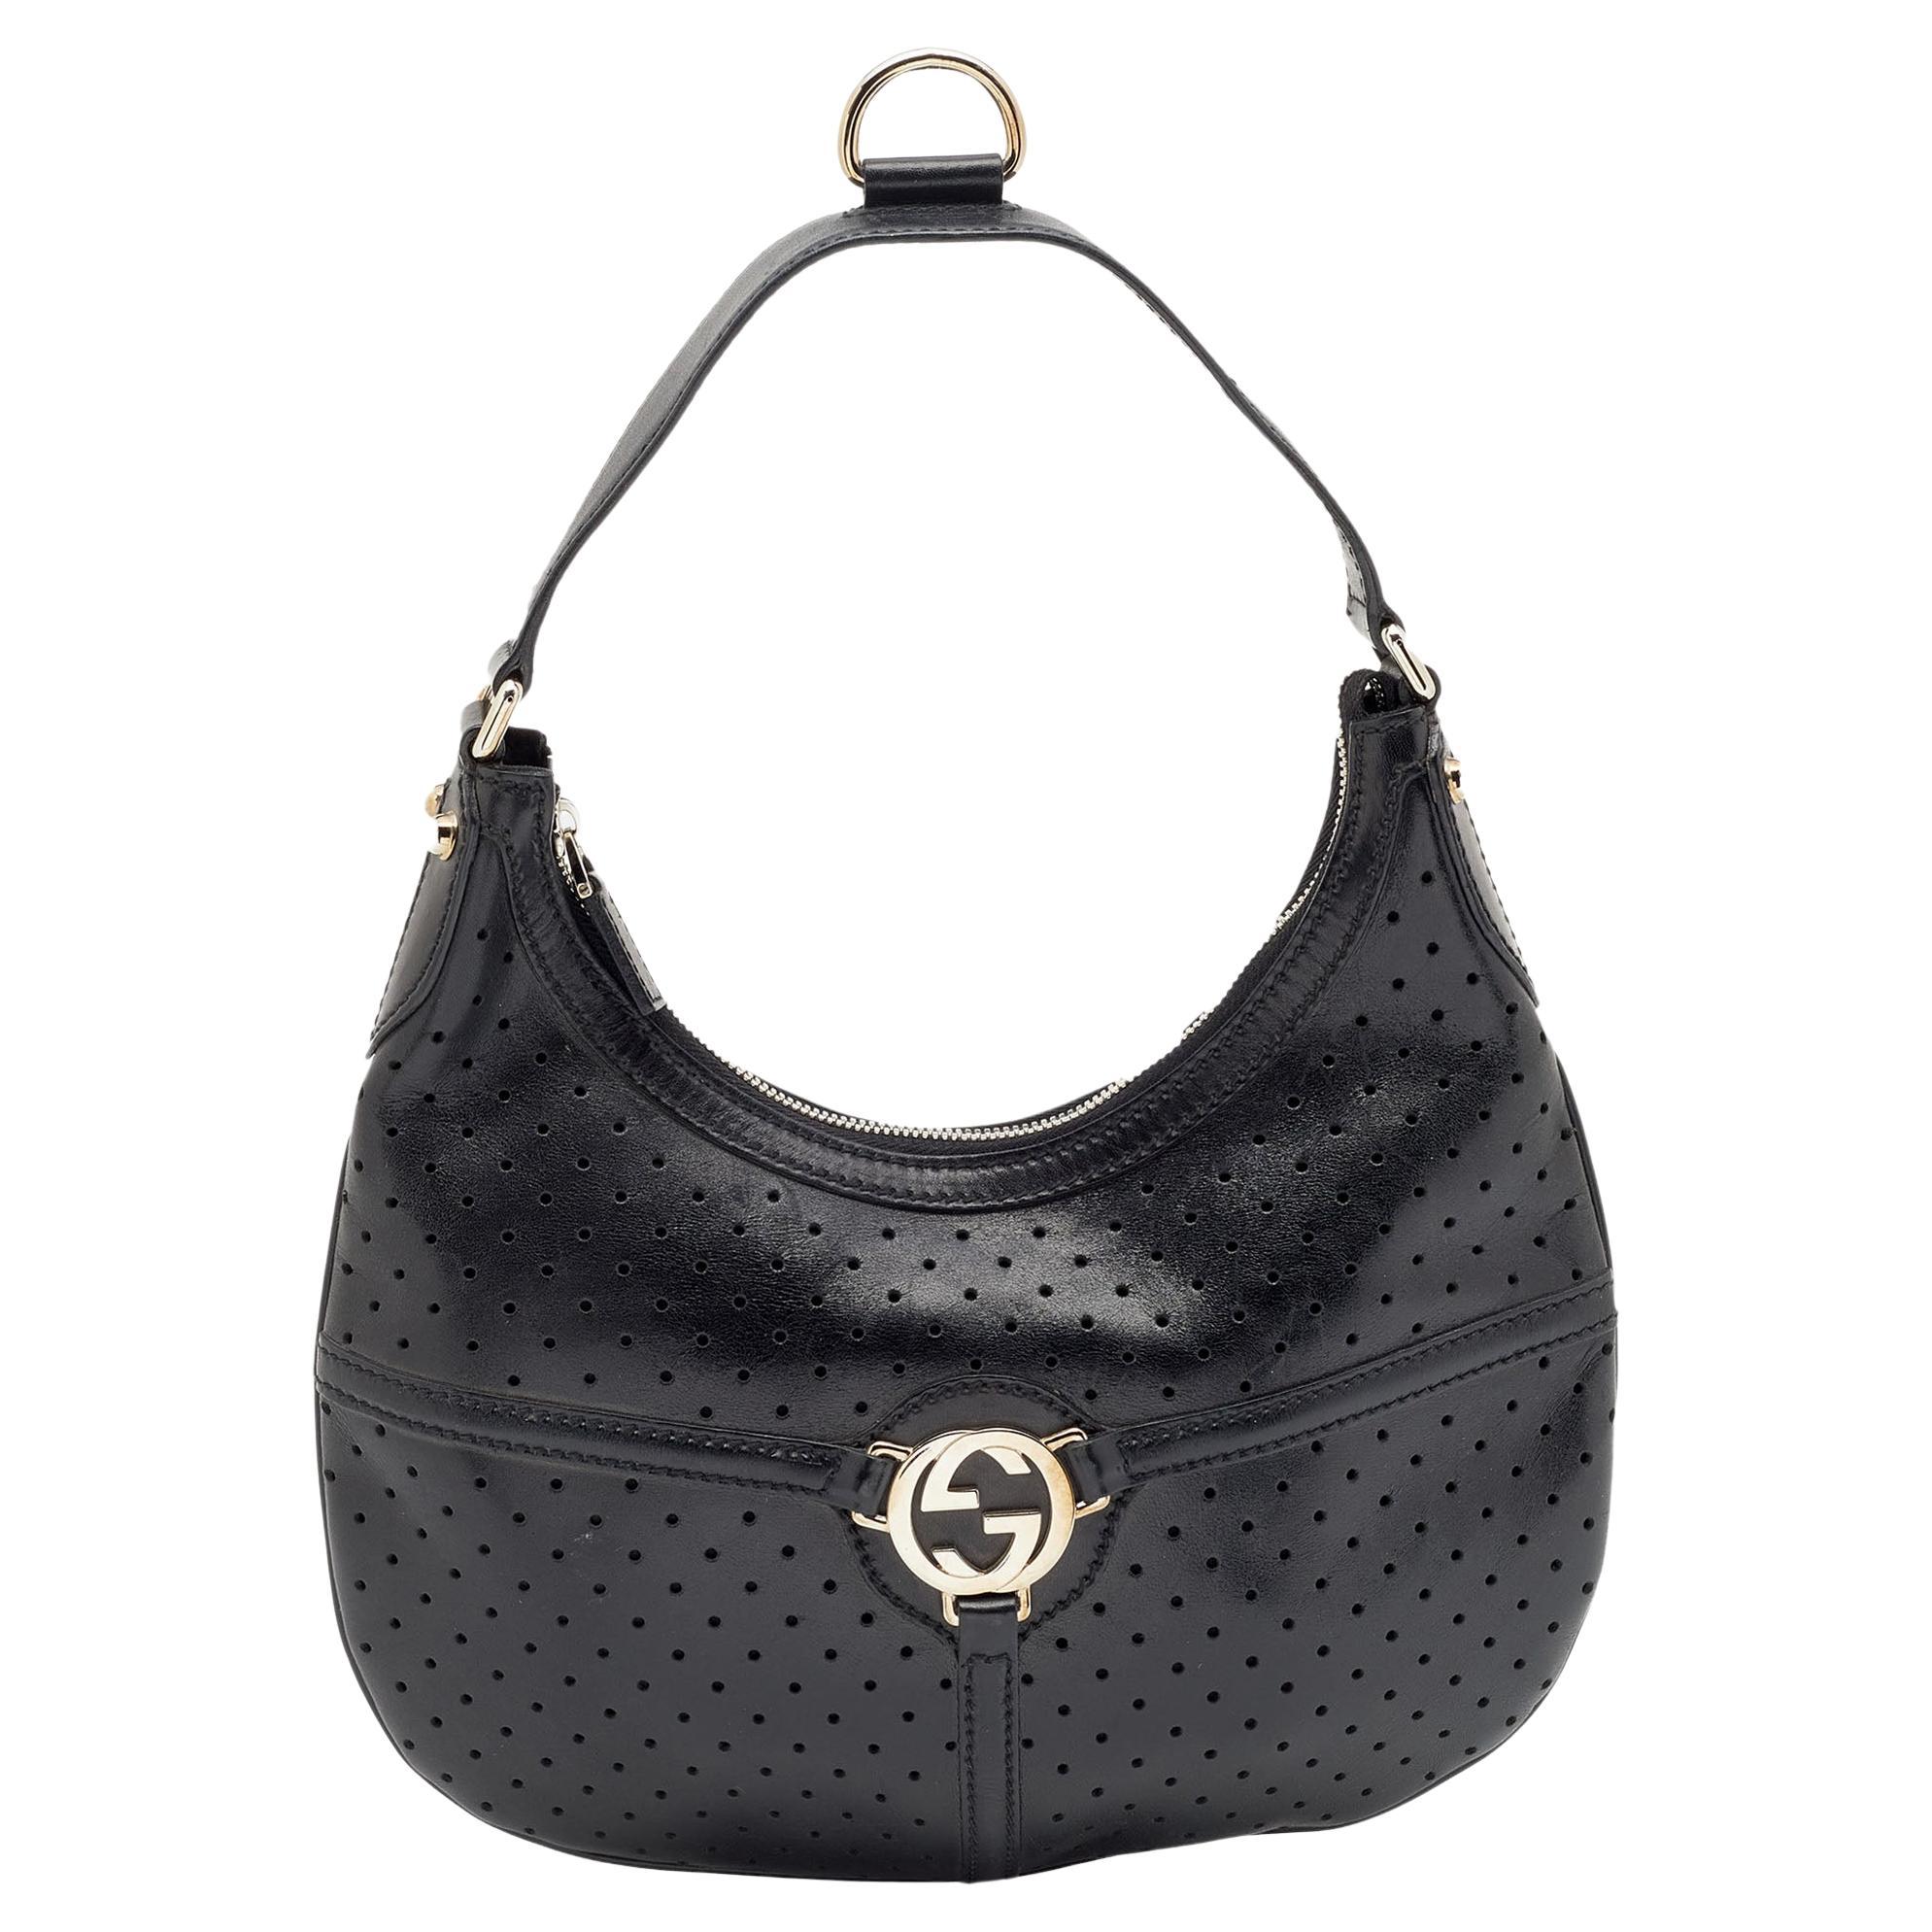 Gucci Black Perforated Leather Reins Hobo